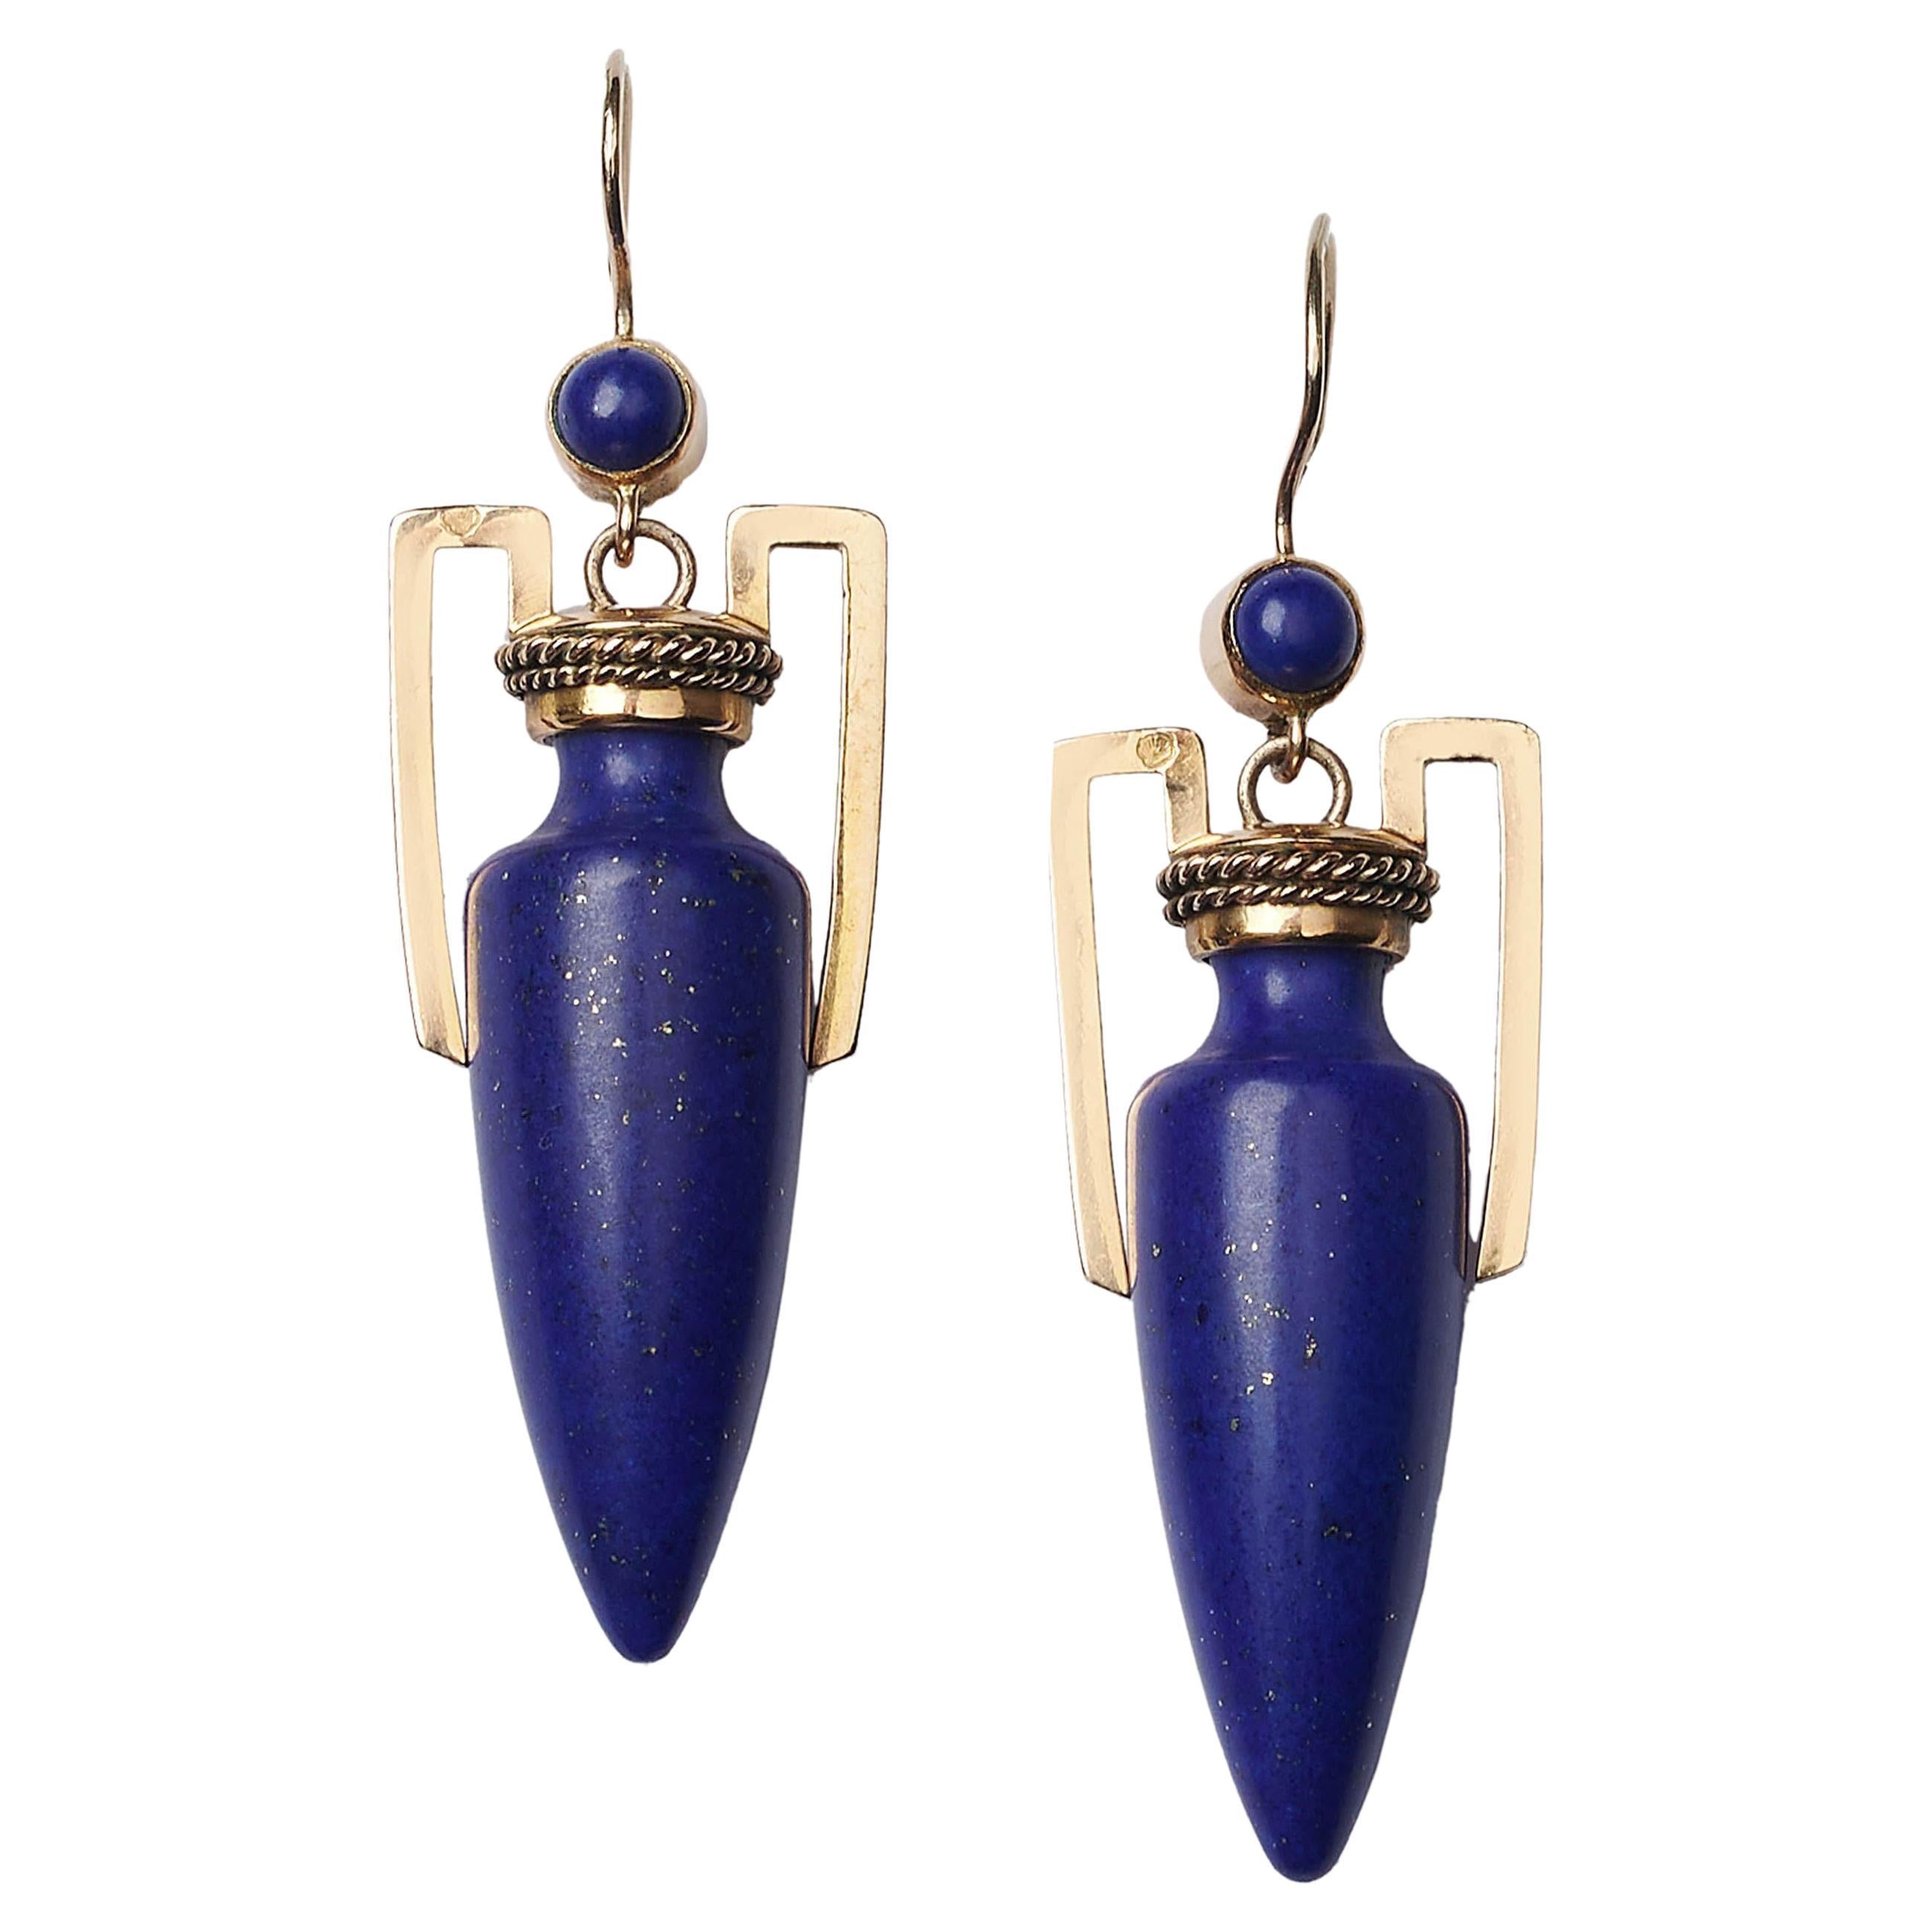 Antique Lapis Lazuli And Gold Amphora Earrings, Circa 1875 For Sale